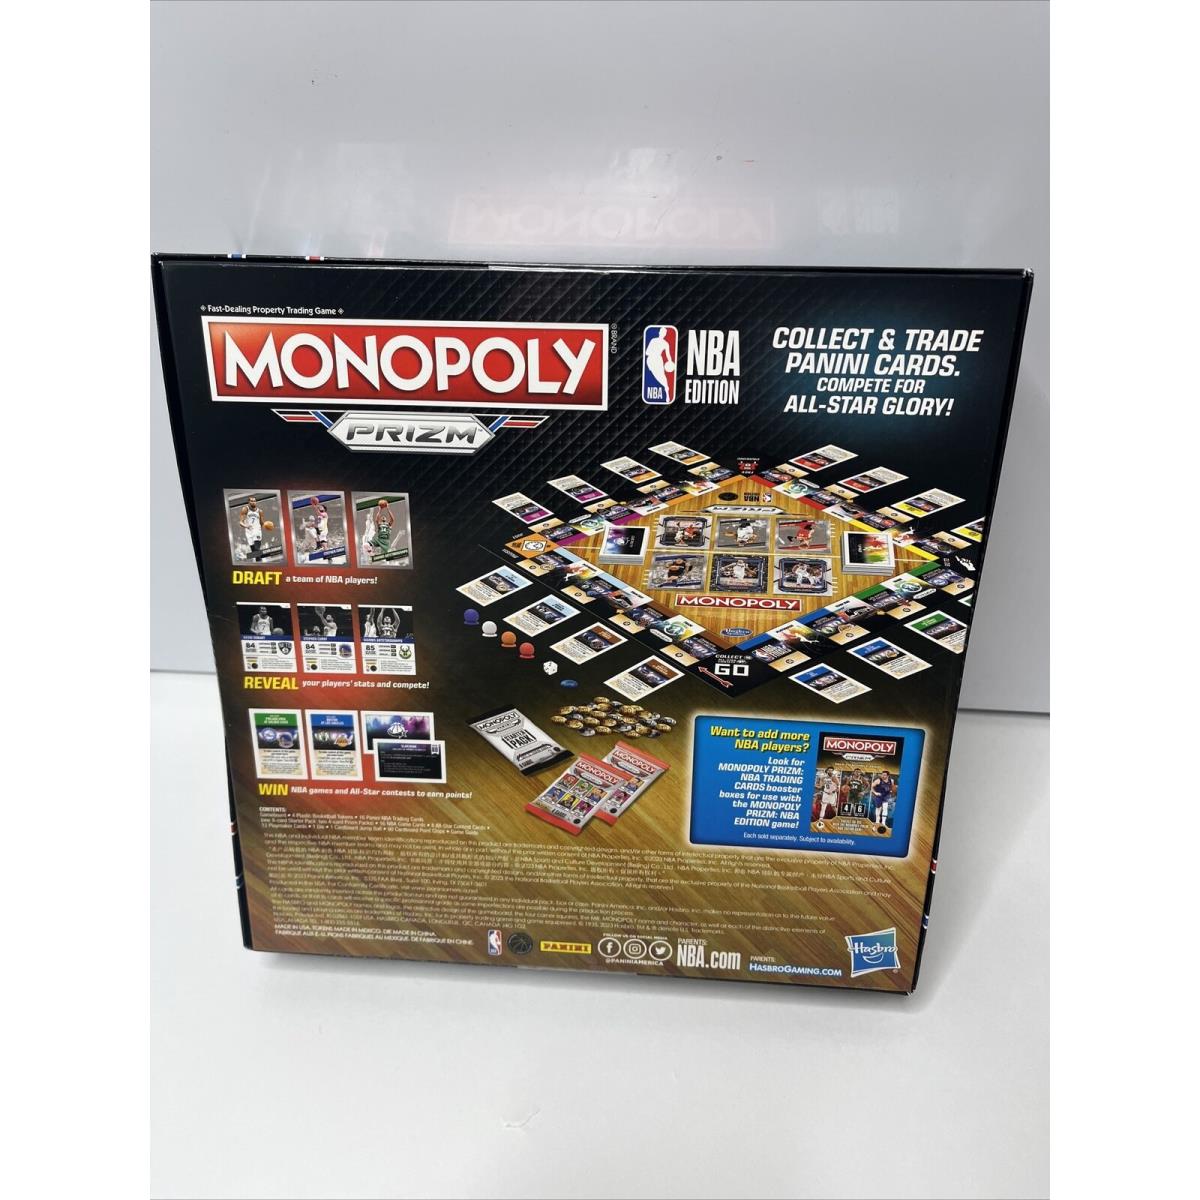 2022-23 Monopoly Prizm Nba Trading Card Edition Board Game - IN Hand Ships Today